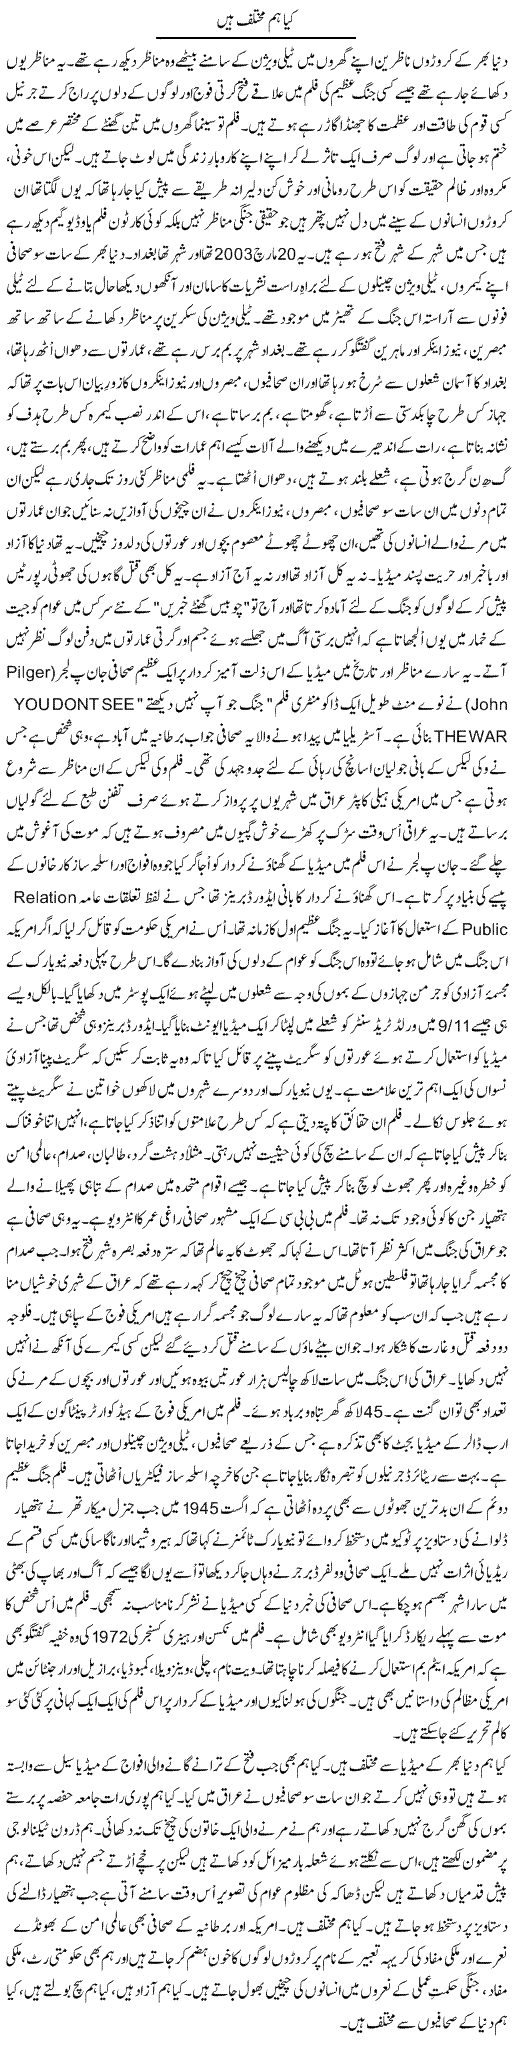 We are Different Express Column Orya Maqbool 1 January 2011